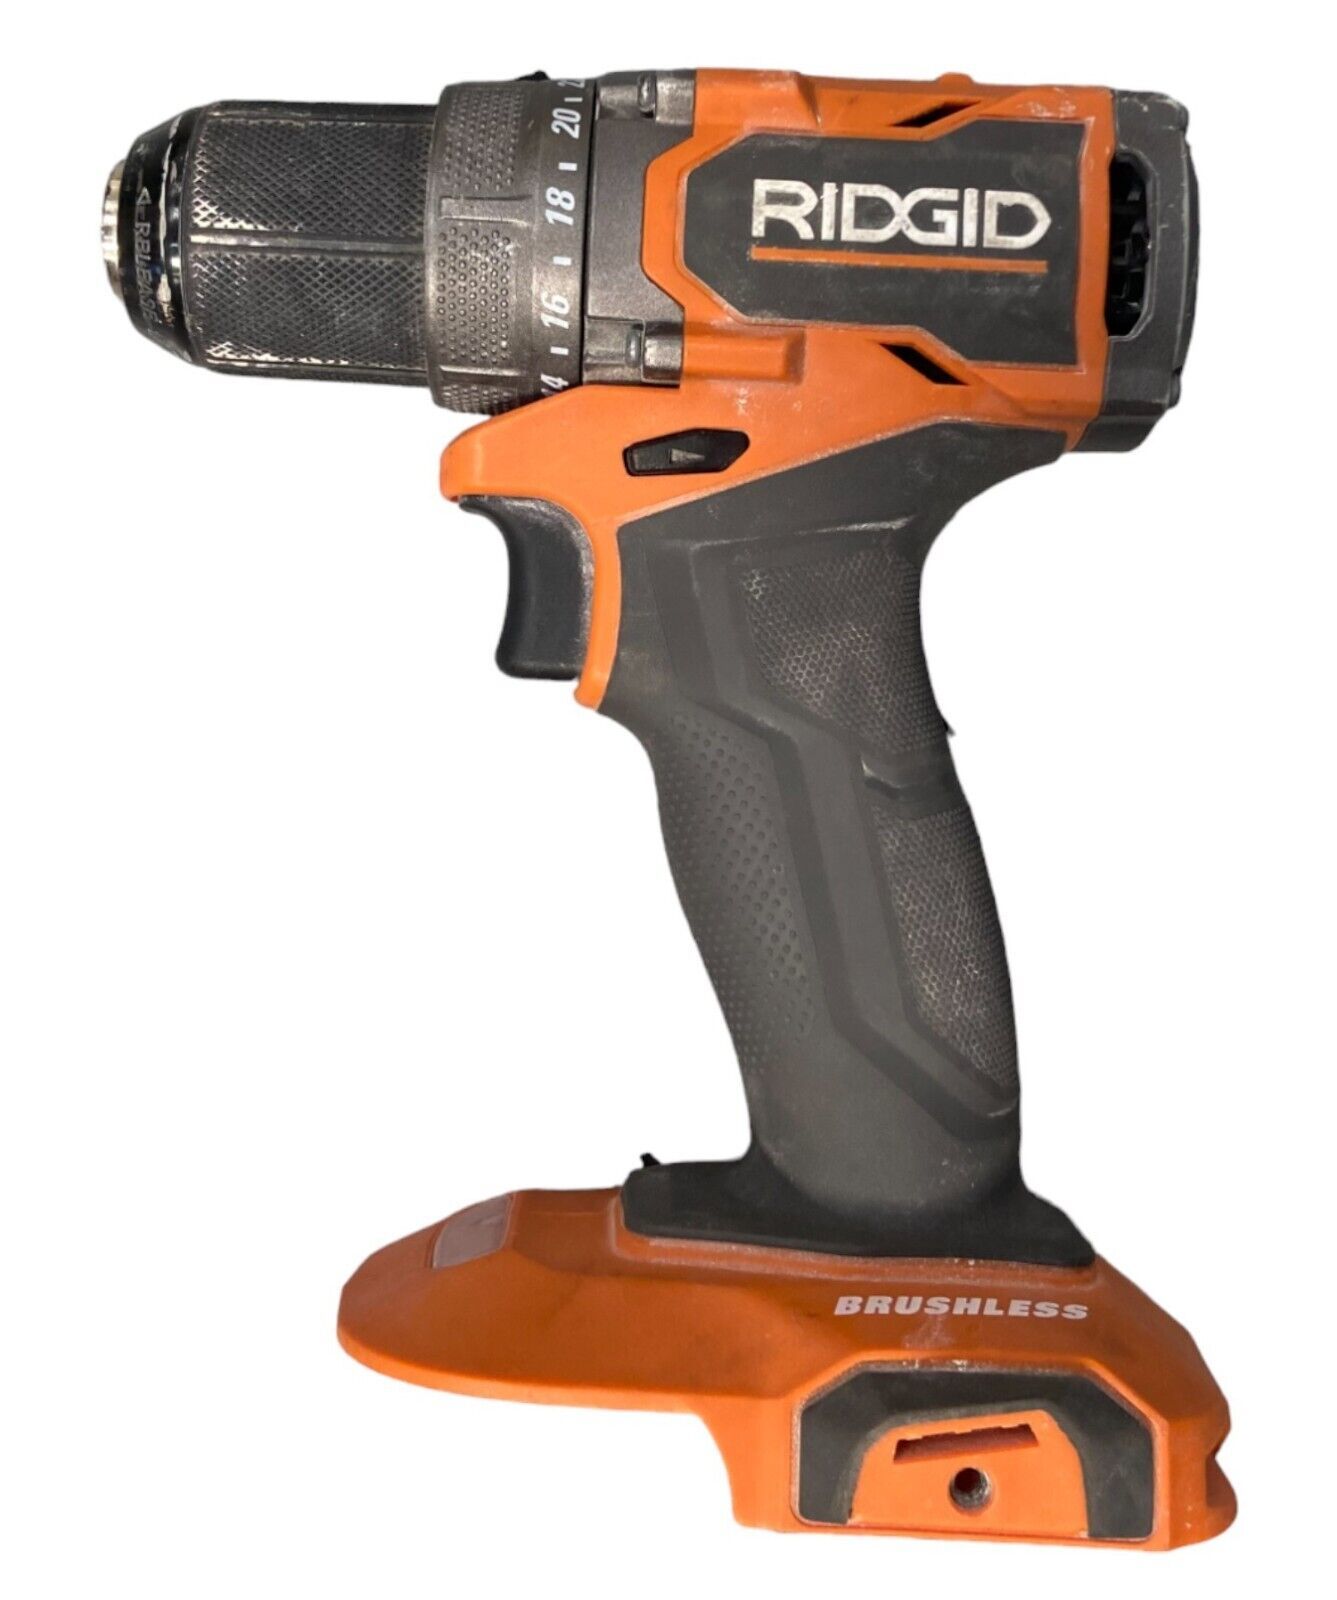 Primary image for USED - RIDGID R87012 18V Brushless Cordless 1/2 in. Drill/Driver - TOOL ONLY